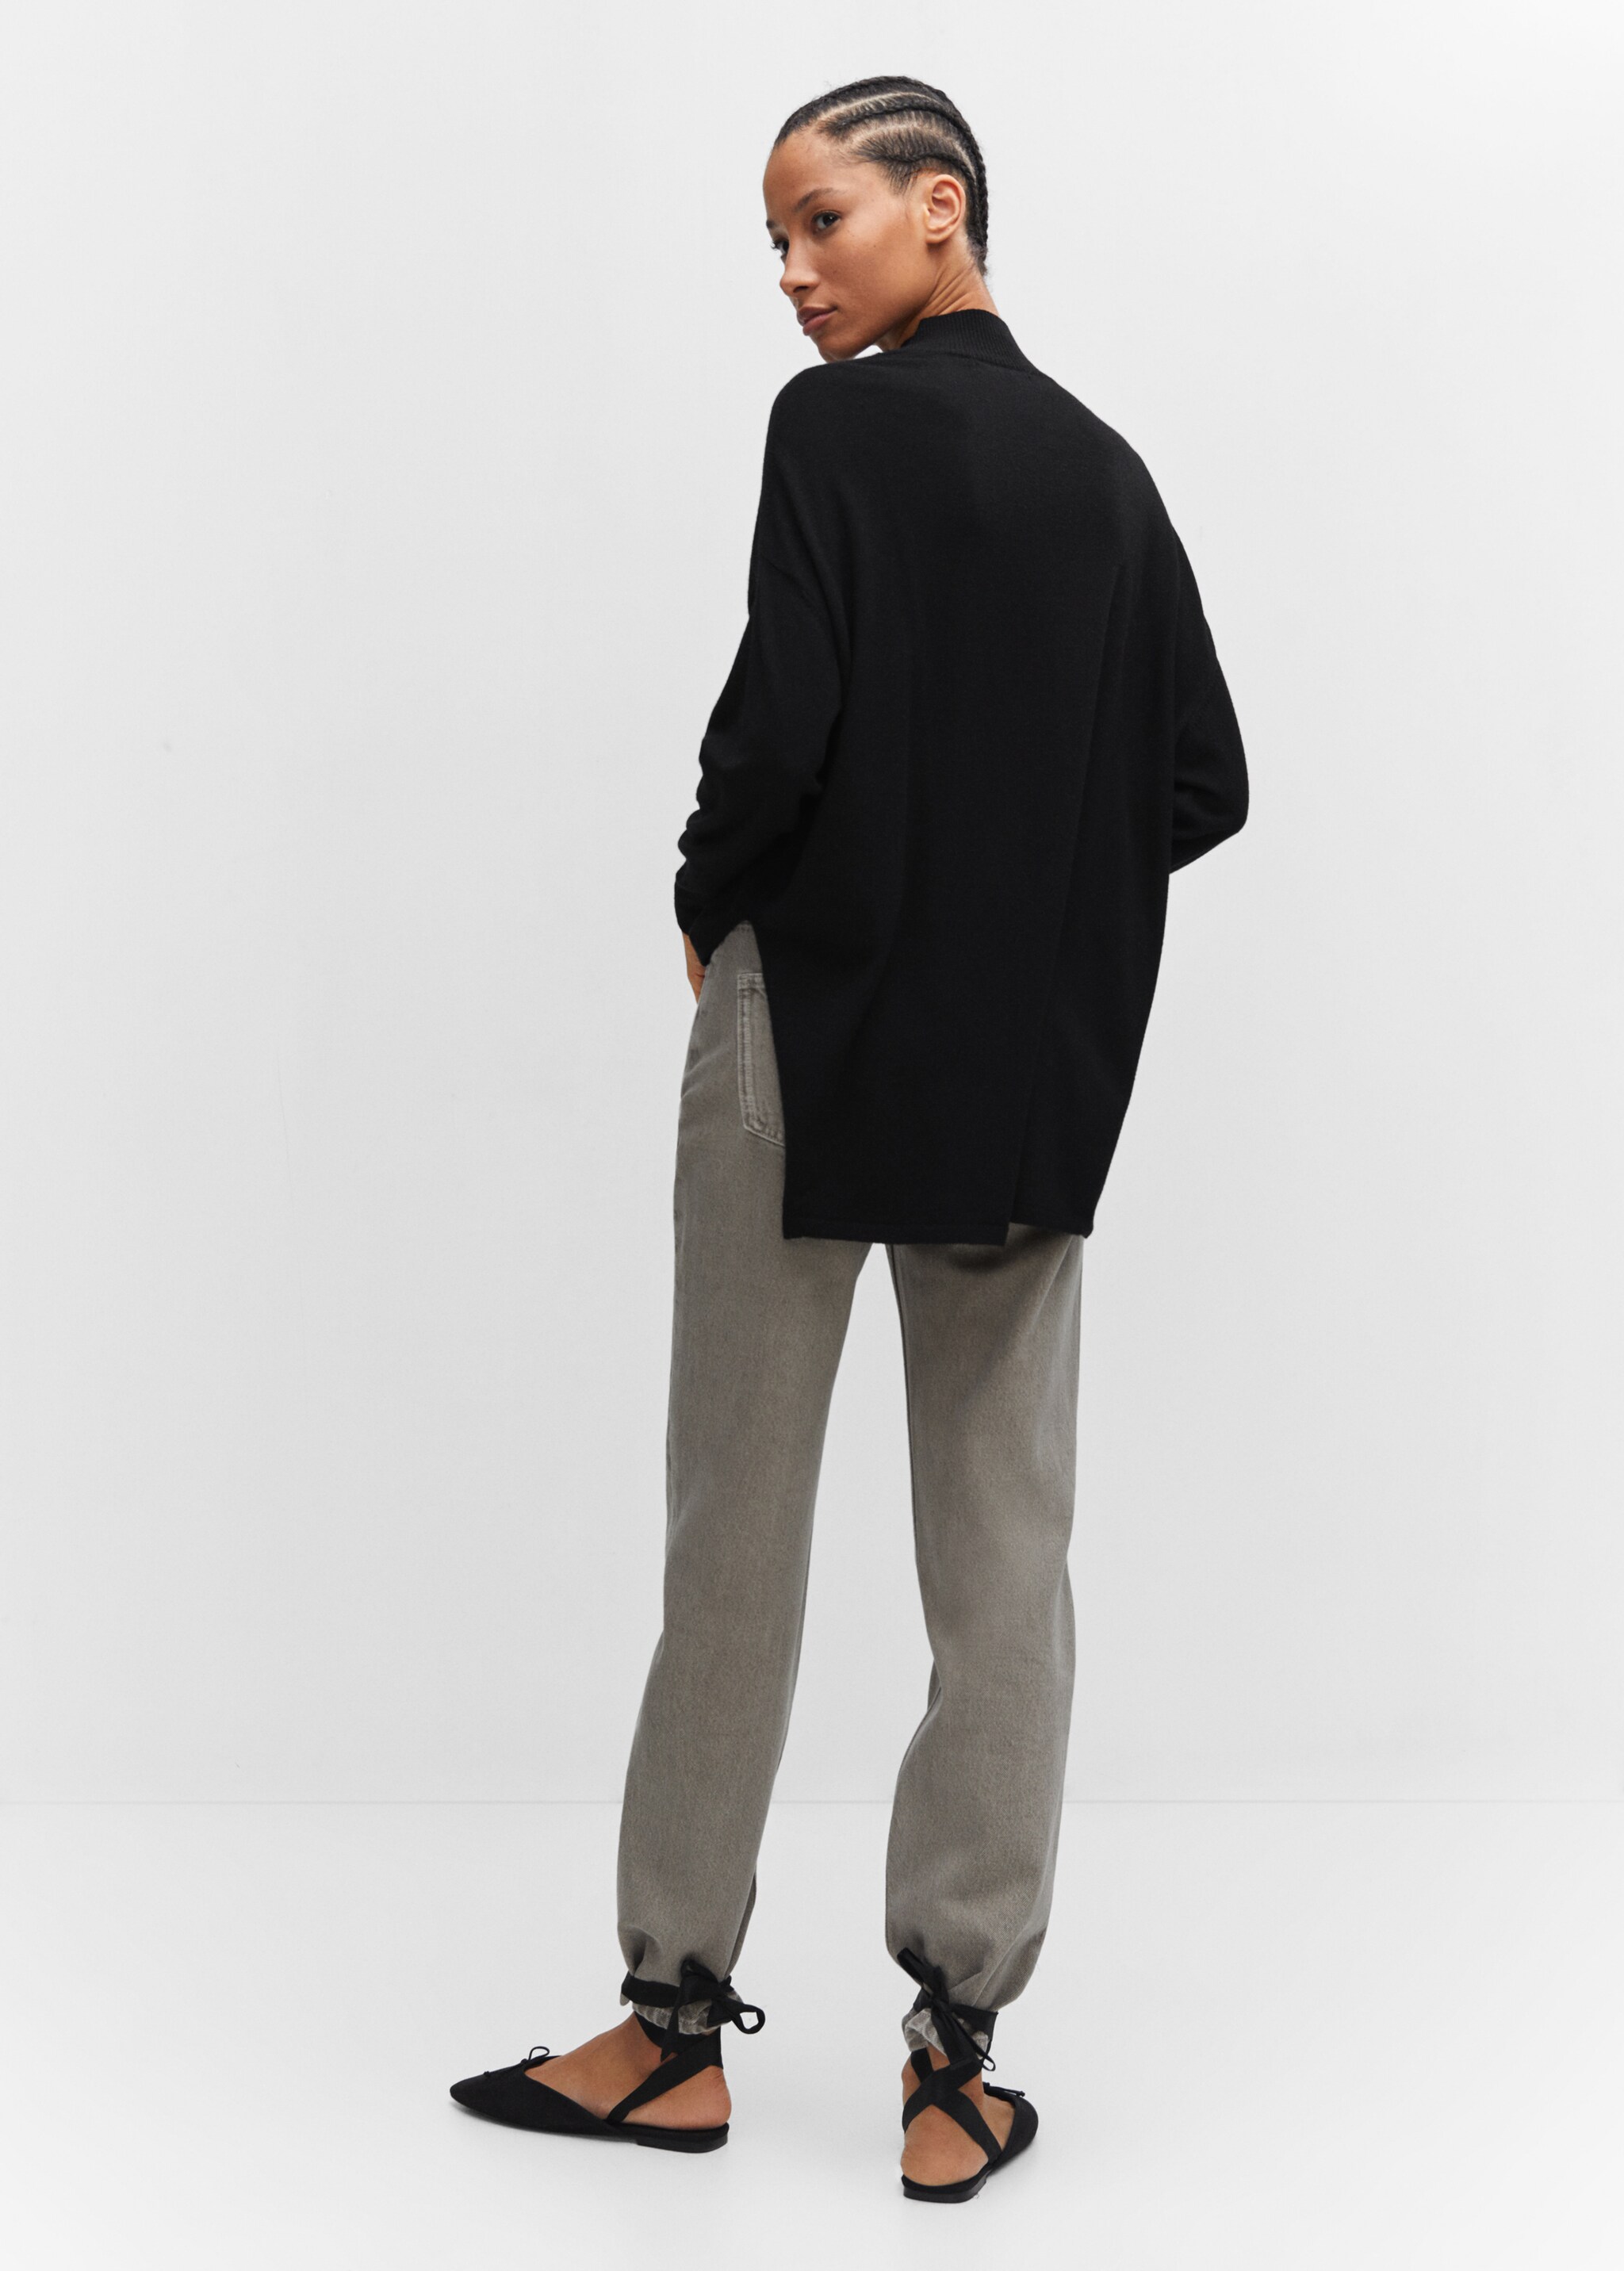 Oversized perkins-neck sweater - Reverse of the article